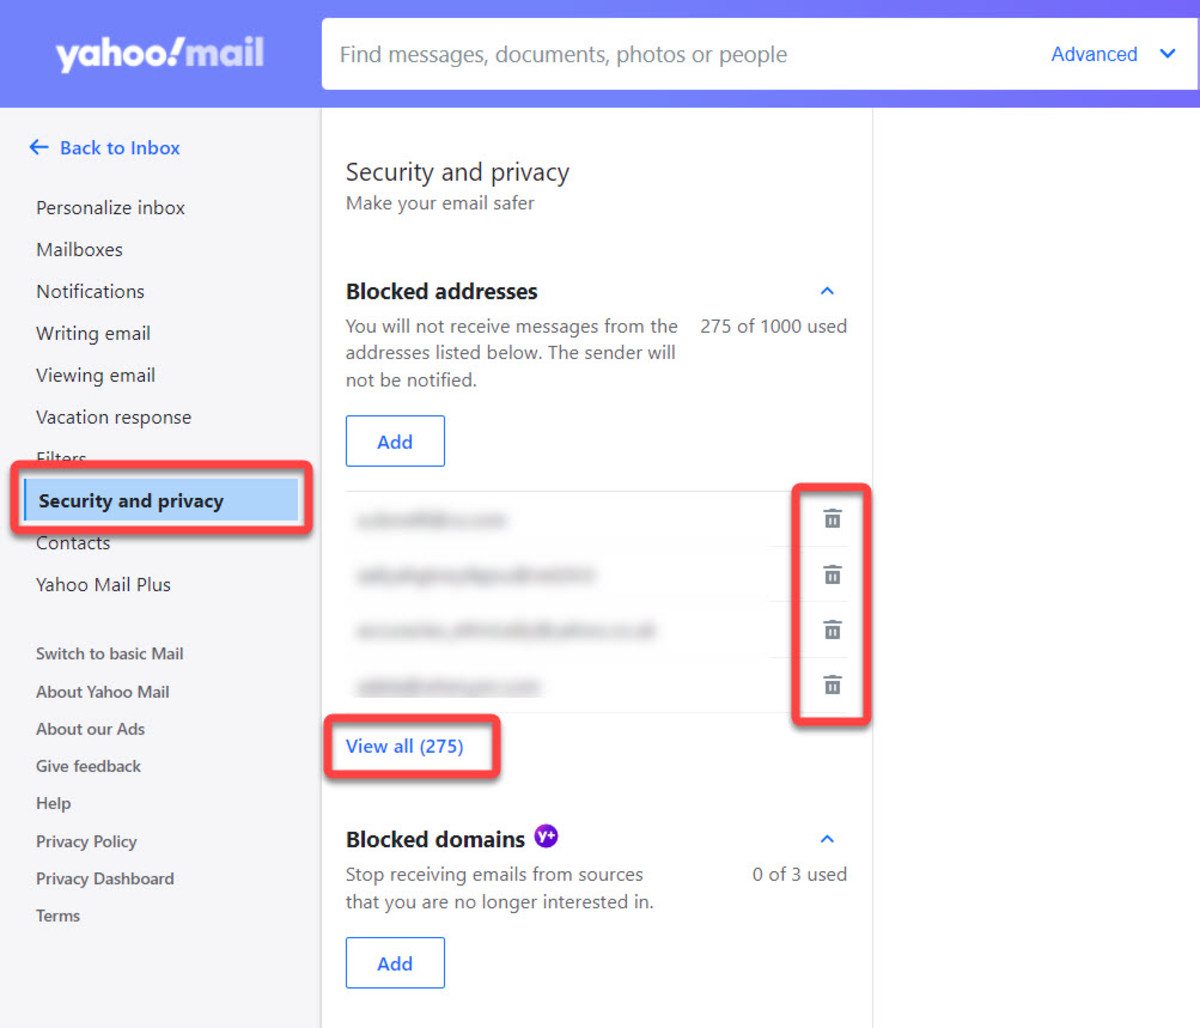 How To Send Spam To The Spam Folder In Yahoo Mail